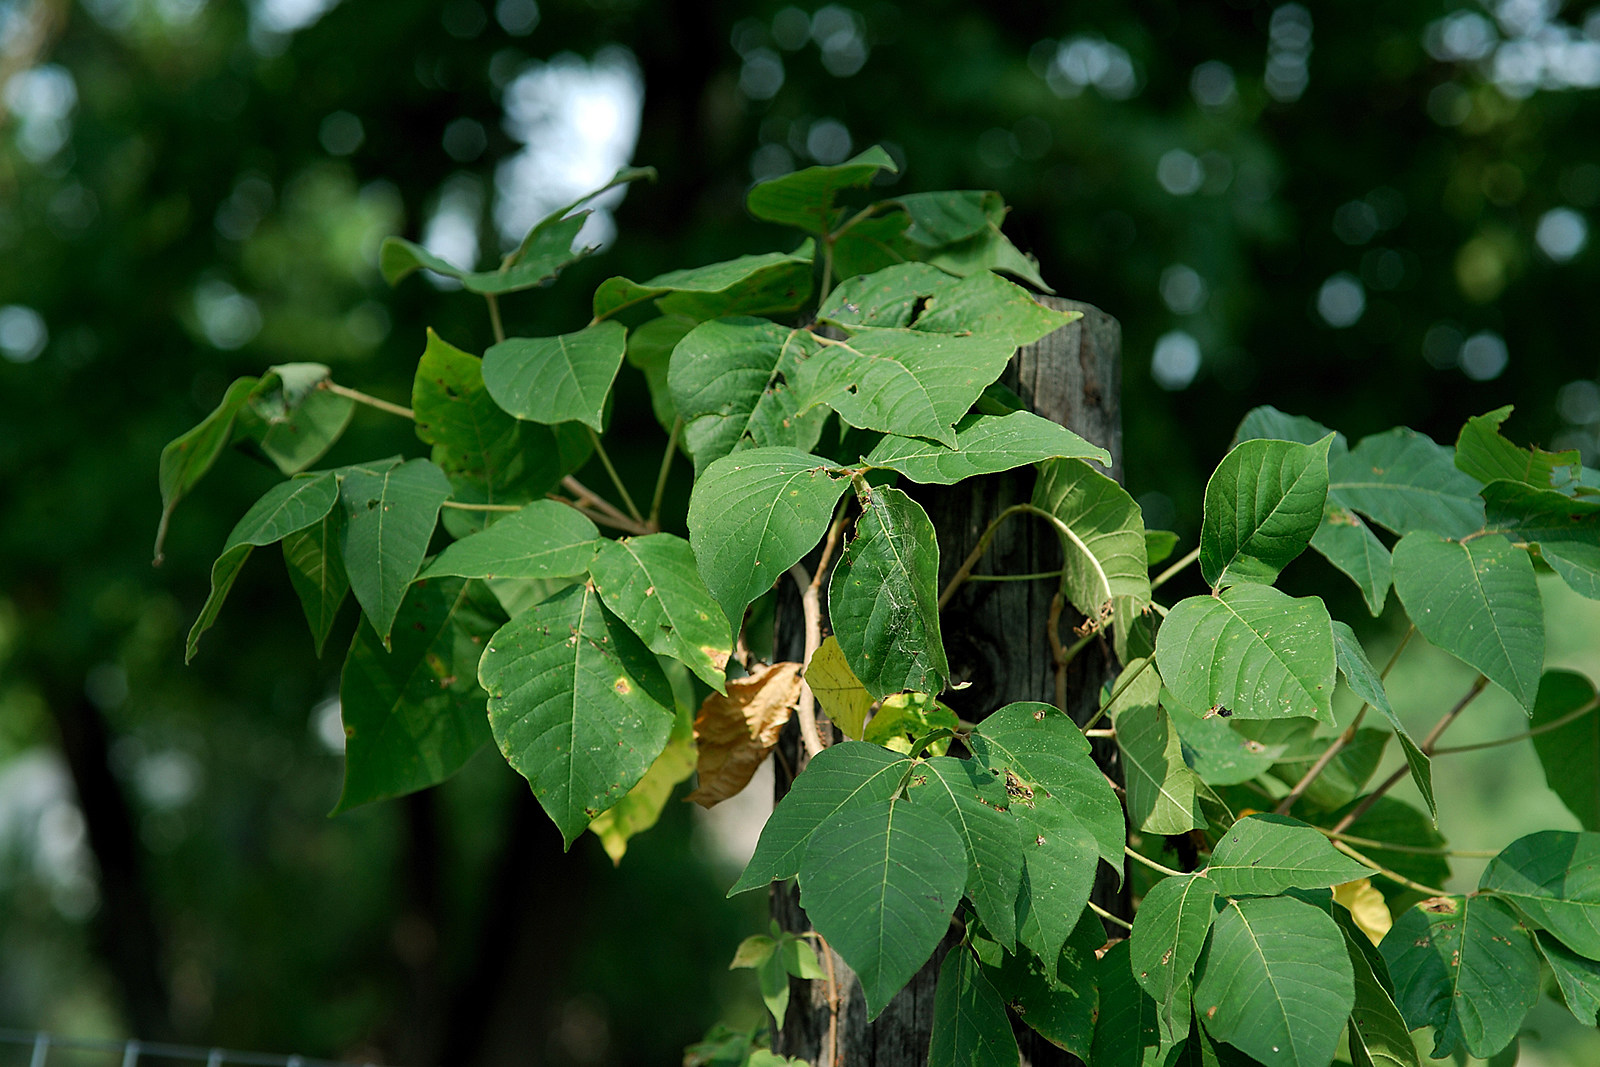 what makes poison ivy poisonous and how does urushiol irritate the skin and cause an itchy rash